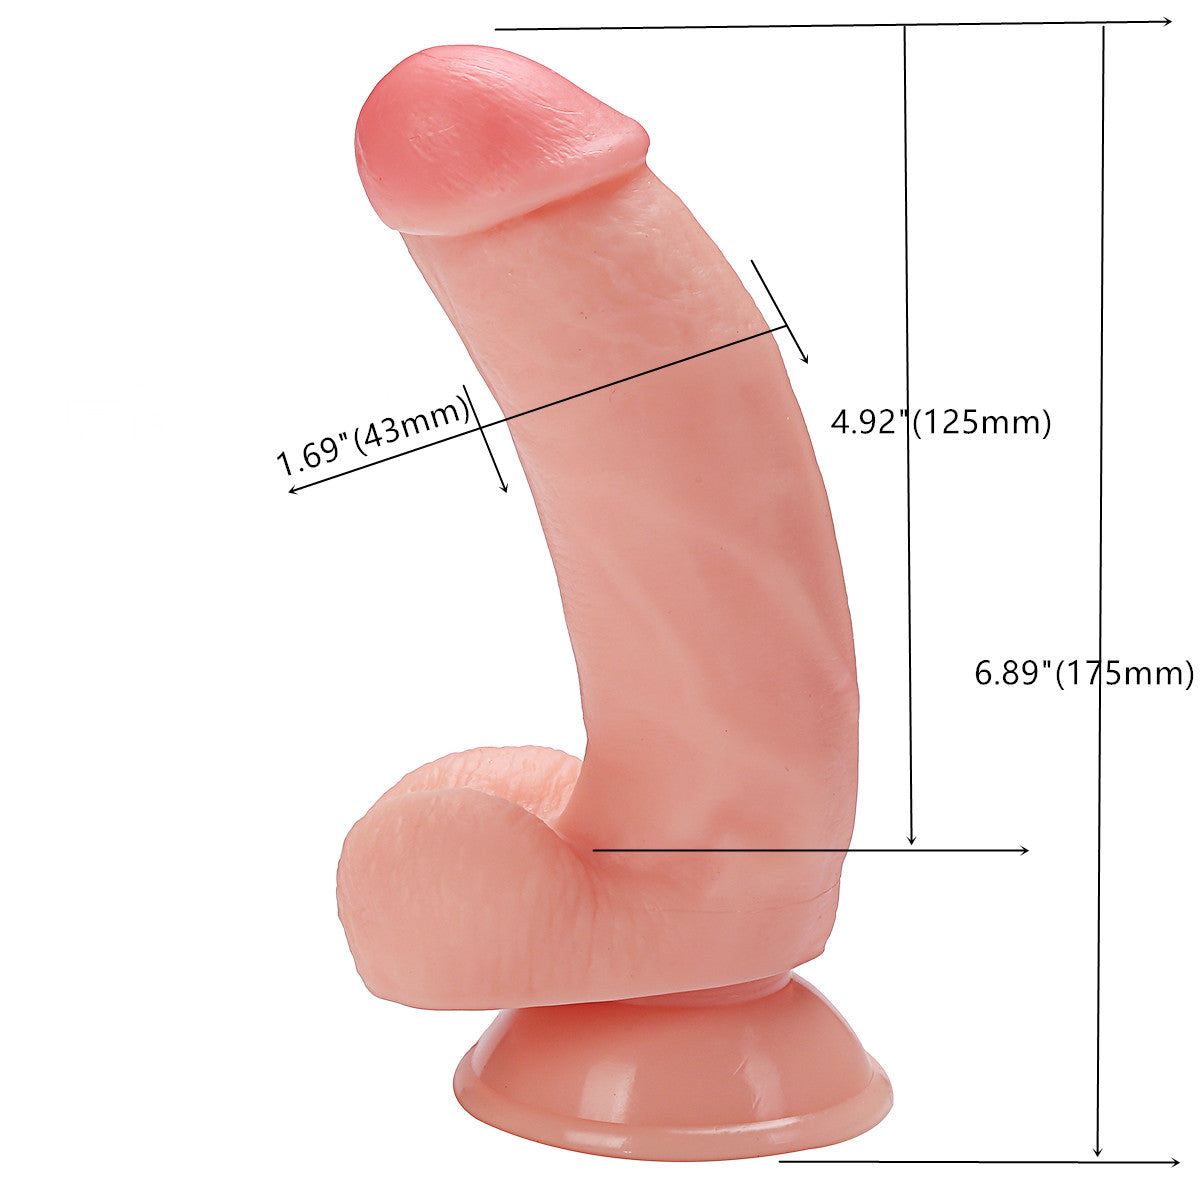 Realistic Tilt Dildo Sex Toy 6.89 inches